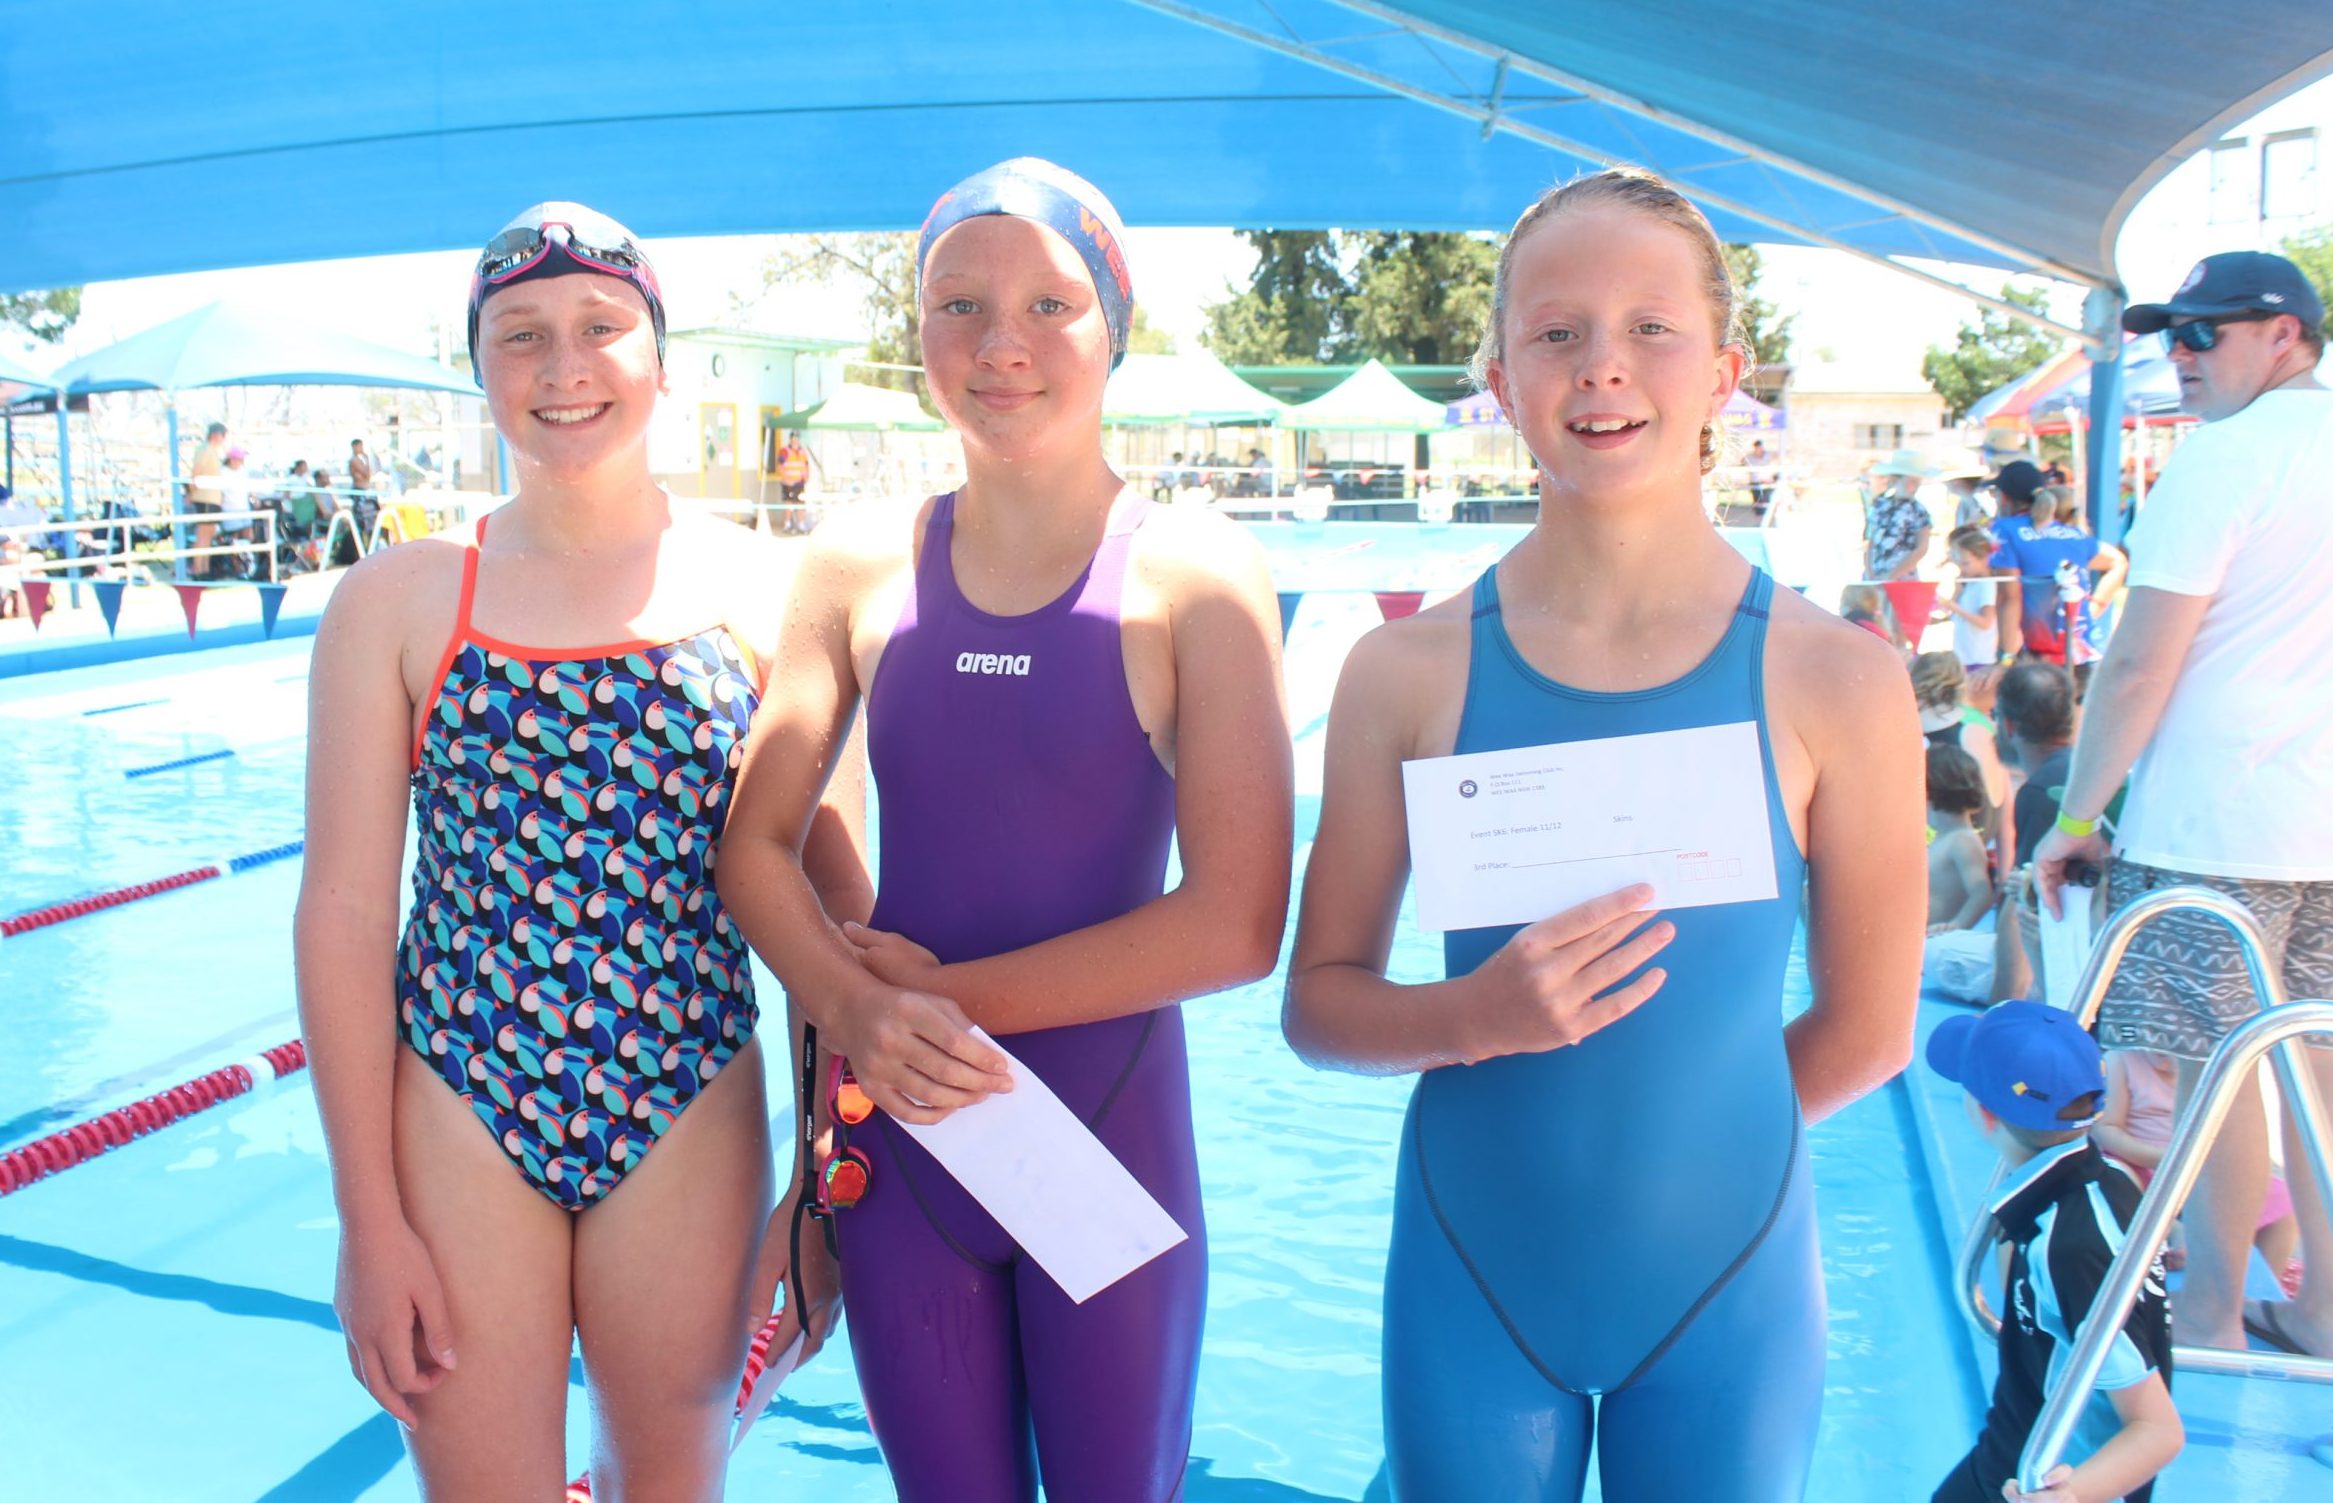 Wee Waa Swimming Club earns praise for Saturday’s SKINS event